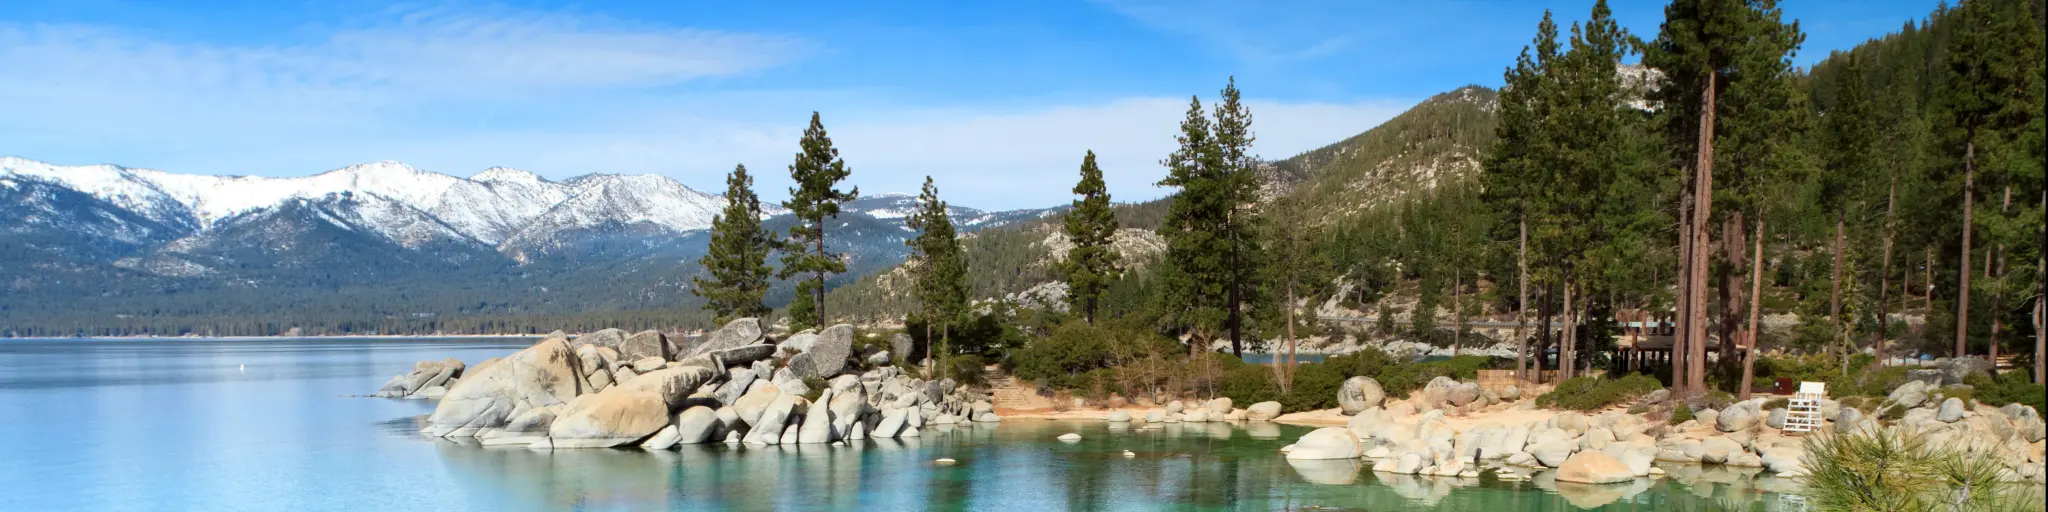 Lake Tahoe showing clear waters surrounded by pebbles